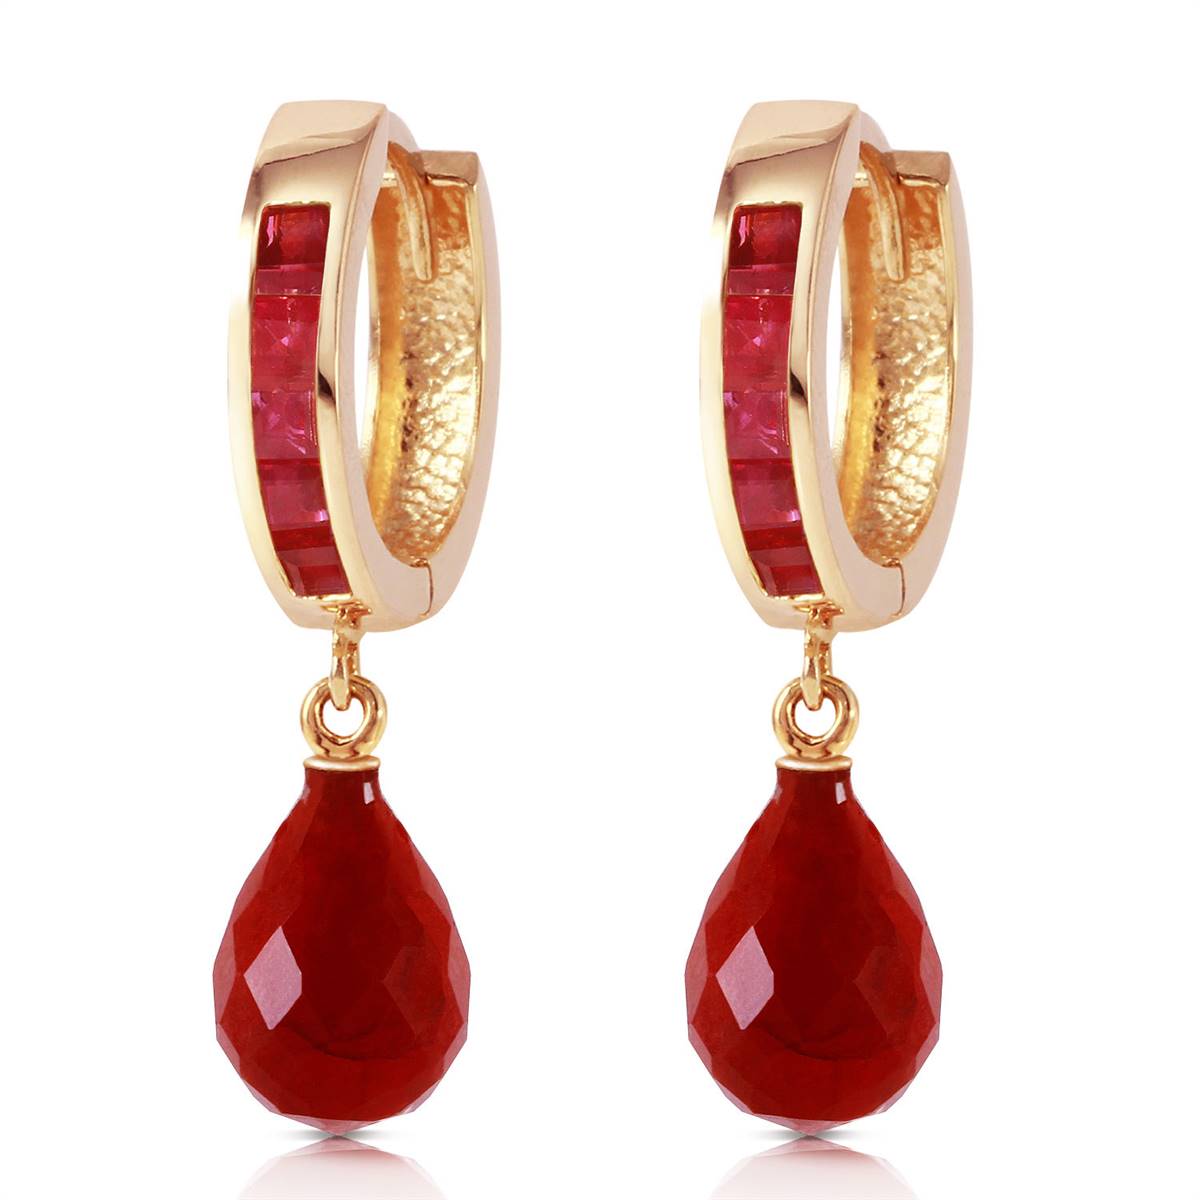 7.8 Carat 14K Solid Yellow Gold Olympia Ruby Earrings